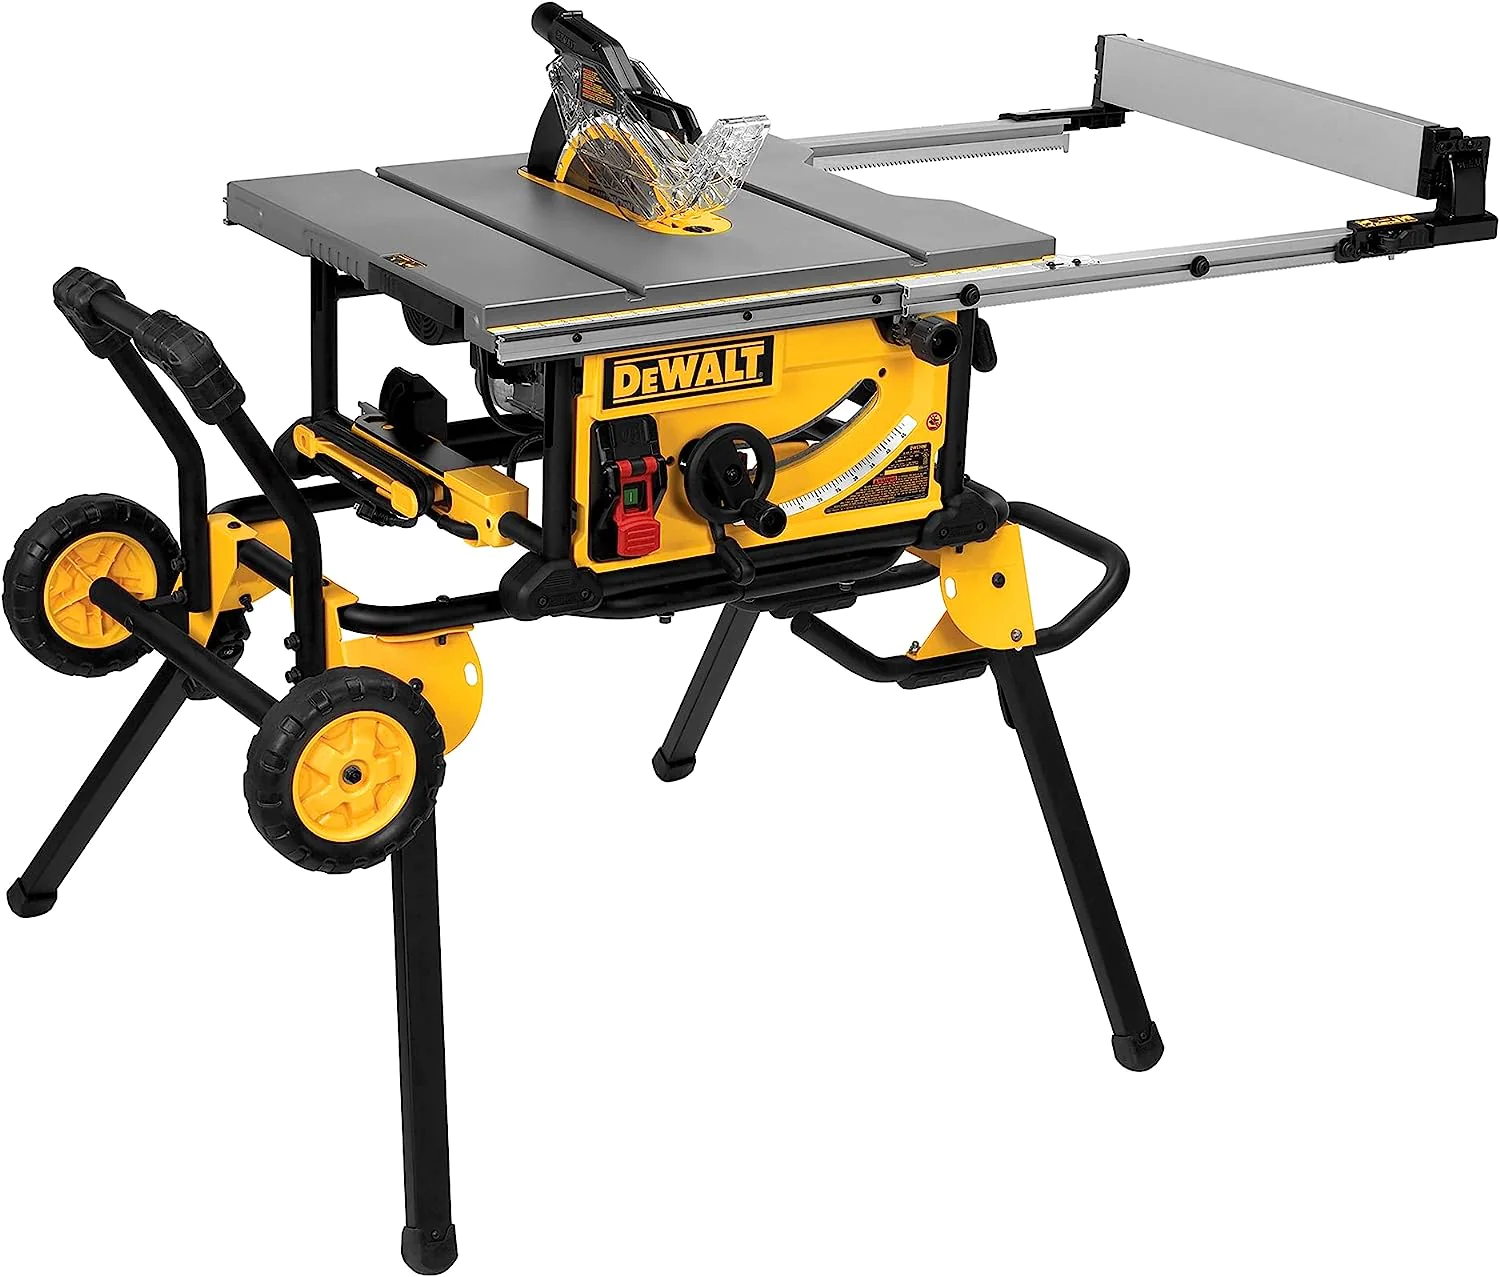 DEWALT 10 Inch Table Saw, 32-1/2 Inch Rip Capacity, 15 Amp Motor, With Rolling